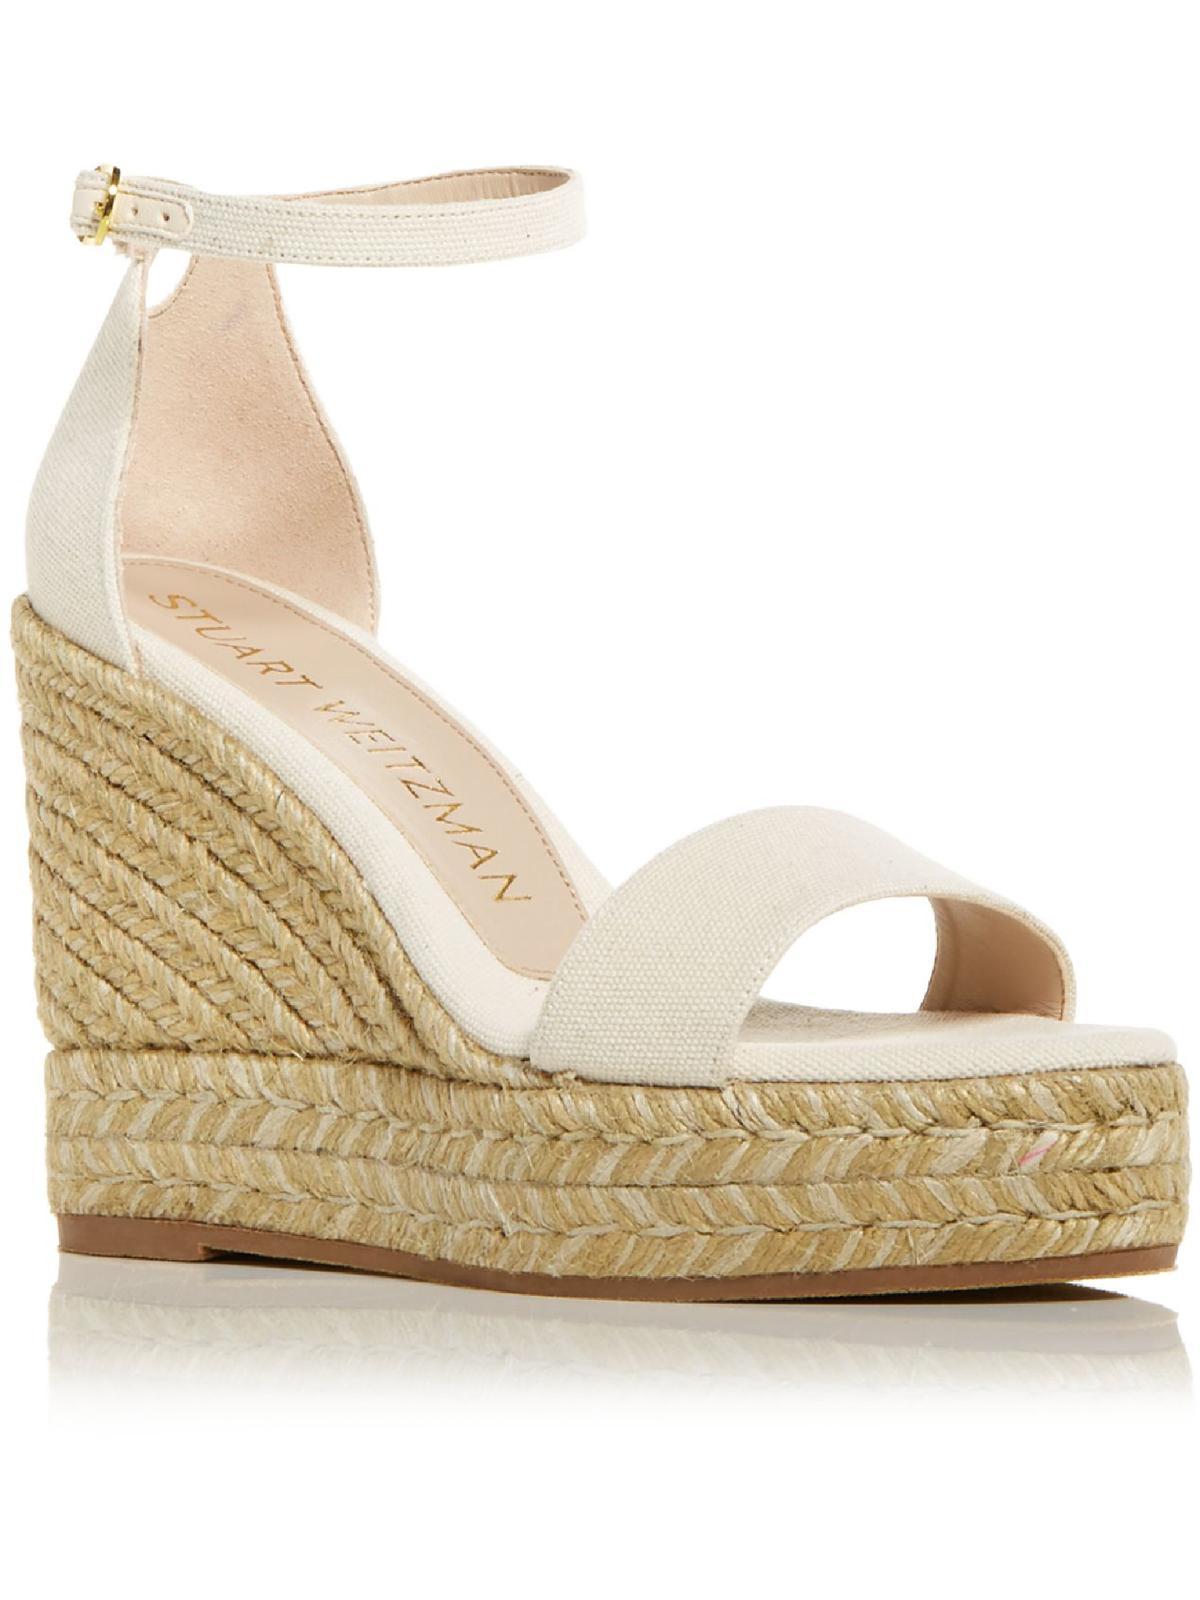 Stuart Weitzman Floria Twill Ankle Strap Wedge Sandals in Natural | Lyst